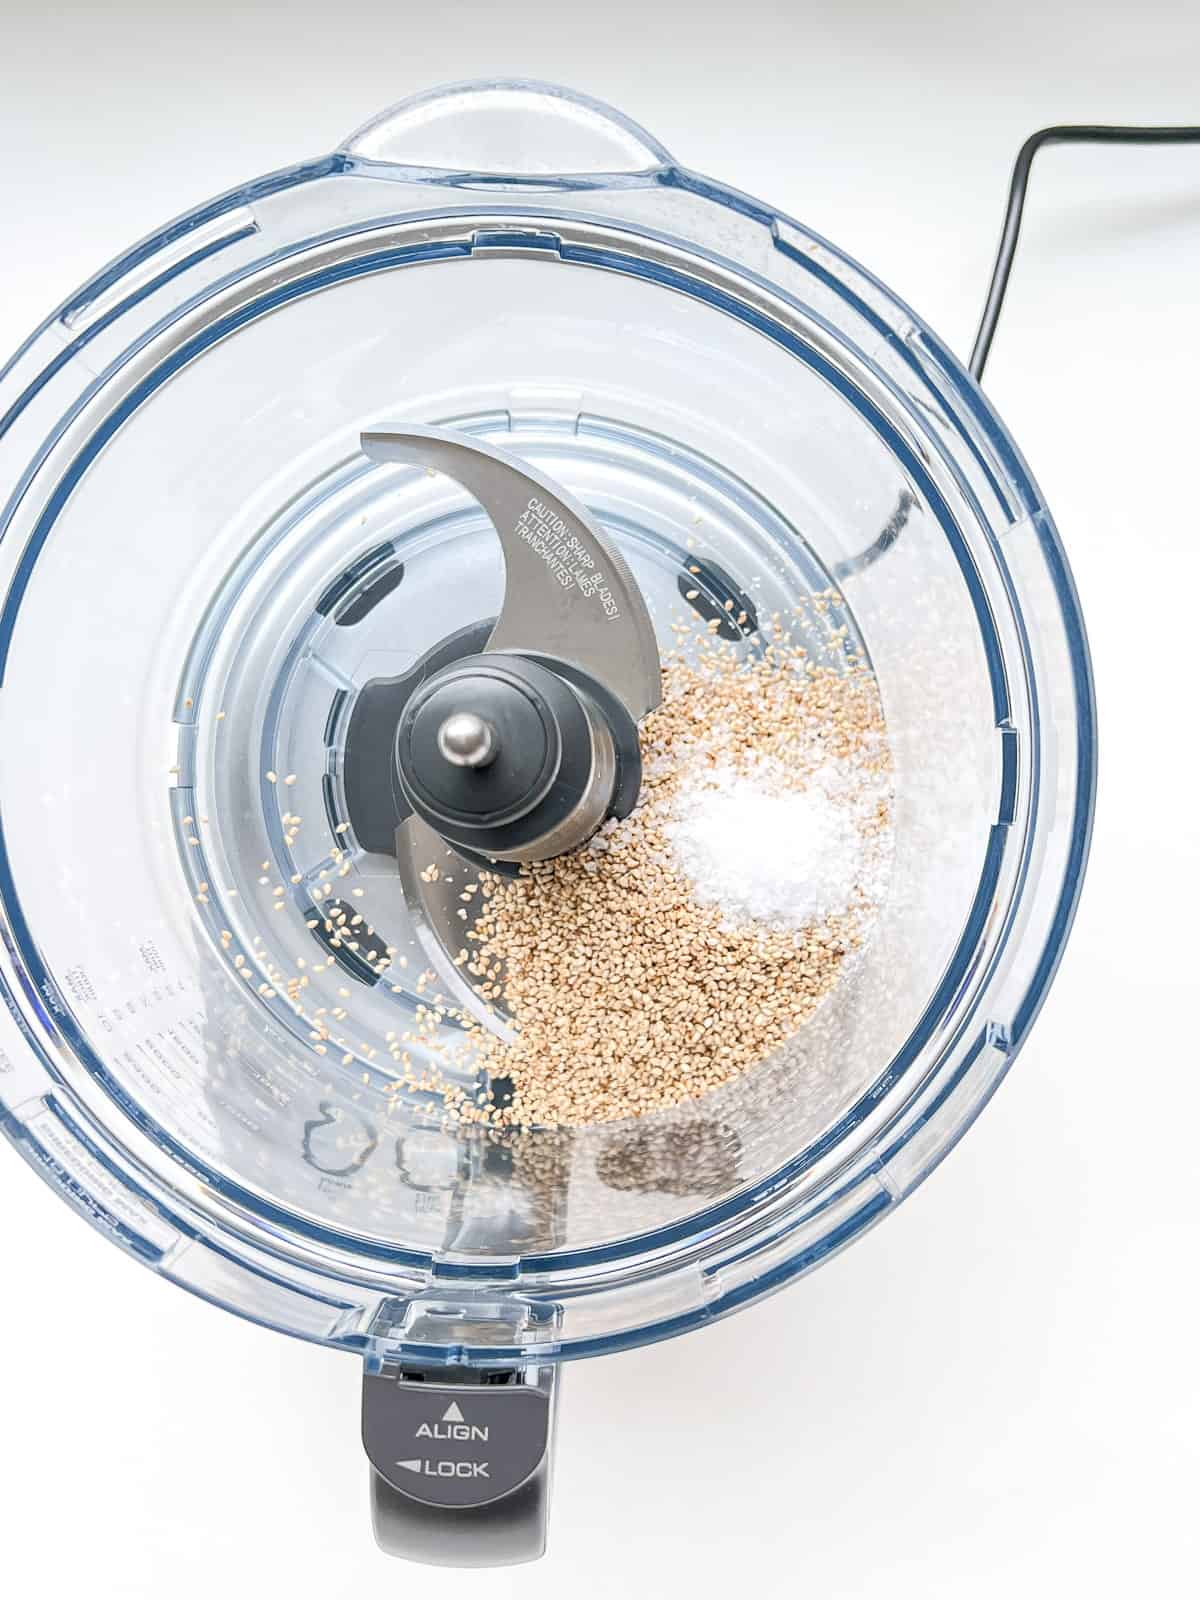 A close up of the bowl of a food processor containing sesame seeds and salt.